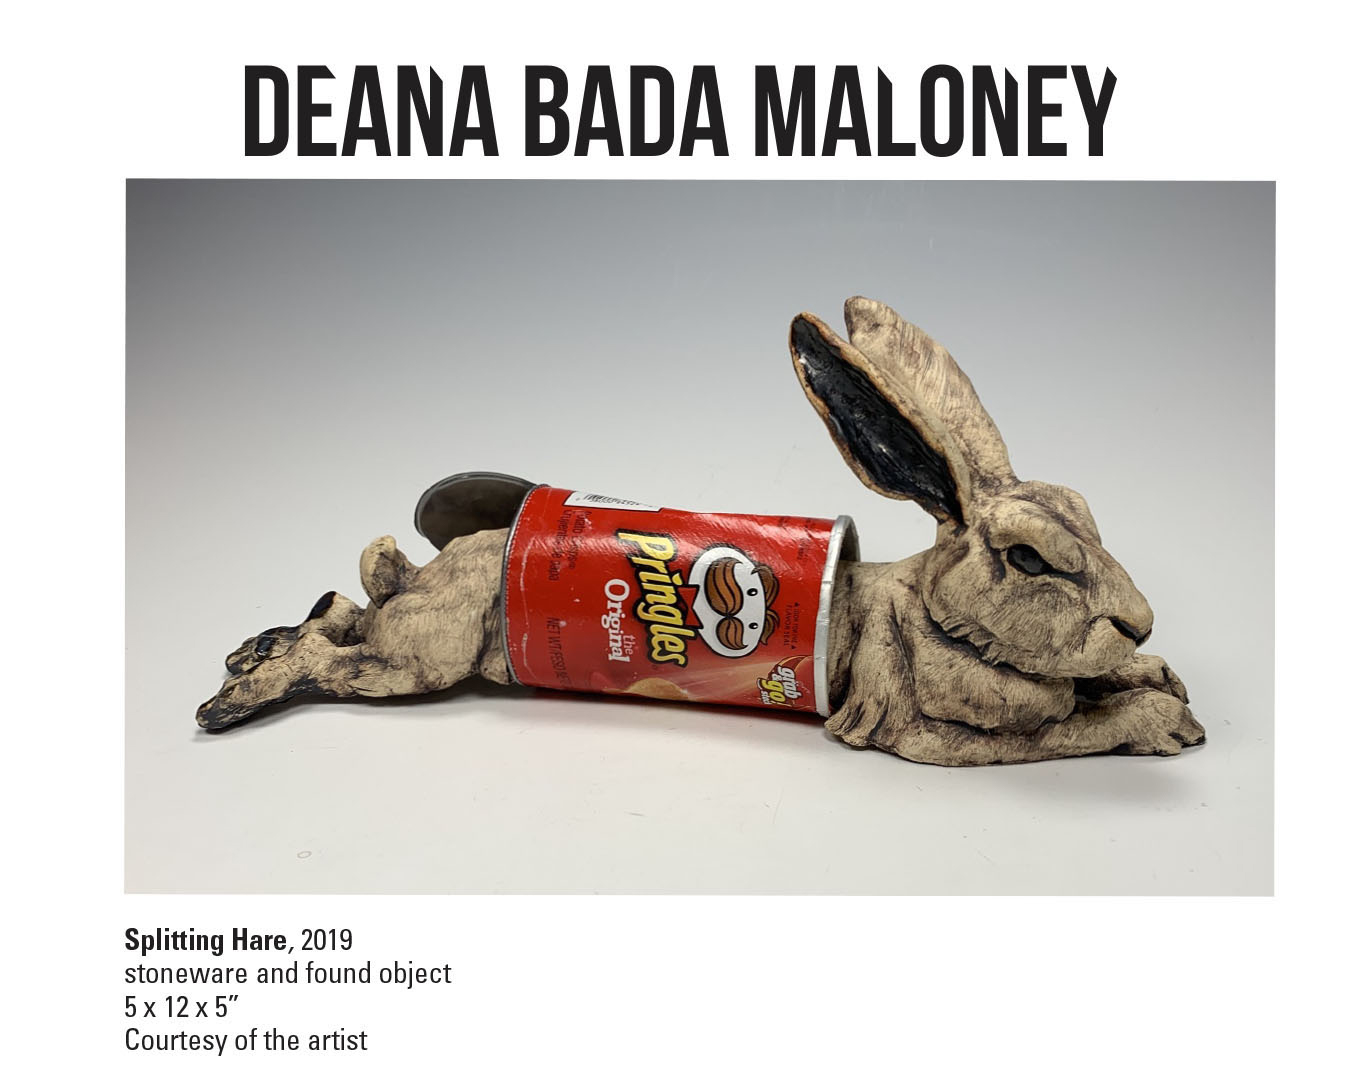 Deana Bada-Maloney, Splitting Hare, 2019. Stoneware and found object. 5 x 12 x 5" Courtesy of the artist.  Deana Bada-Maloney, Nectar, 2019. Stoneware and found objects. 7.5 x 4 x 2.5" Courtesy of the artist A sculpture of a hare caught in between a canister of ships.